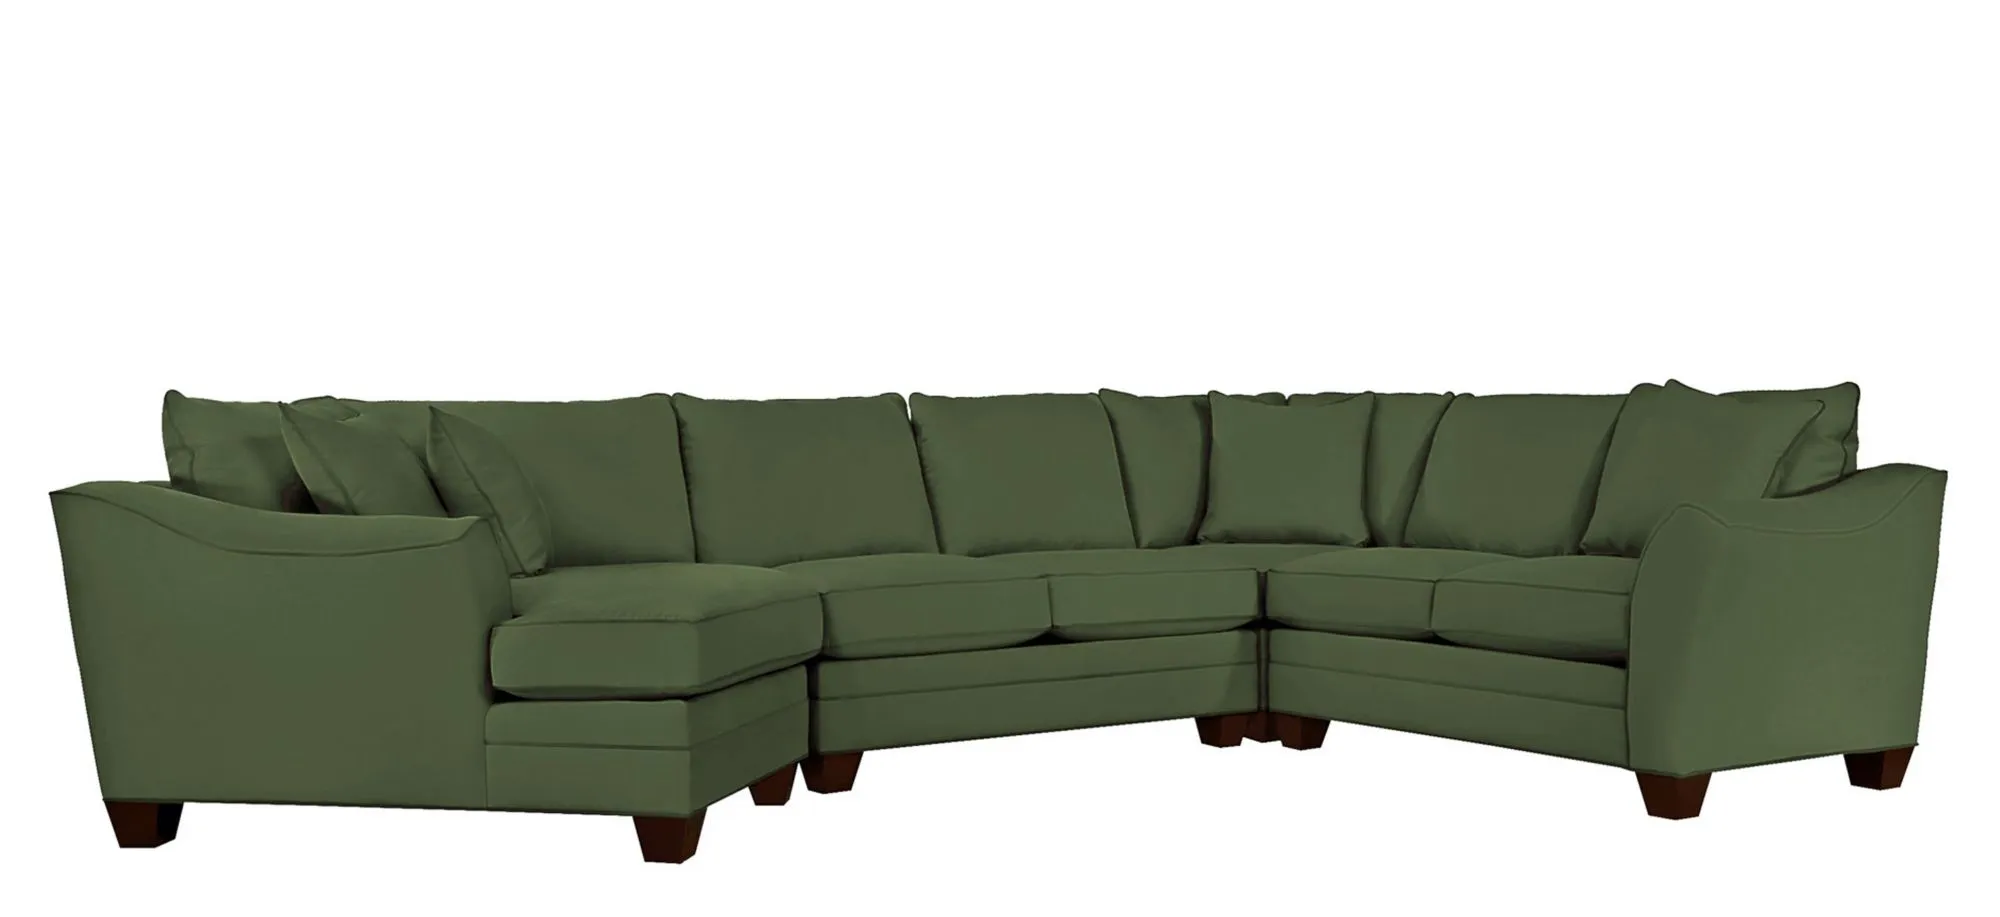 Foresthill 4-pc. Left Hand Cuddler with Loveseat Sectional Sofa in Suede So Soft Pine by H.M. Richards